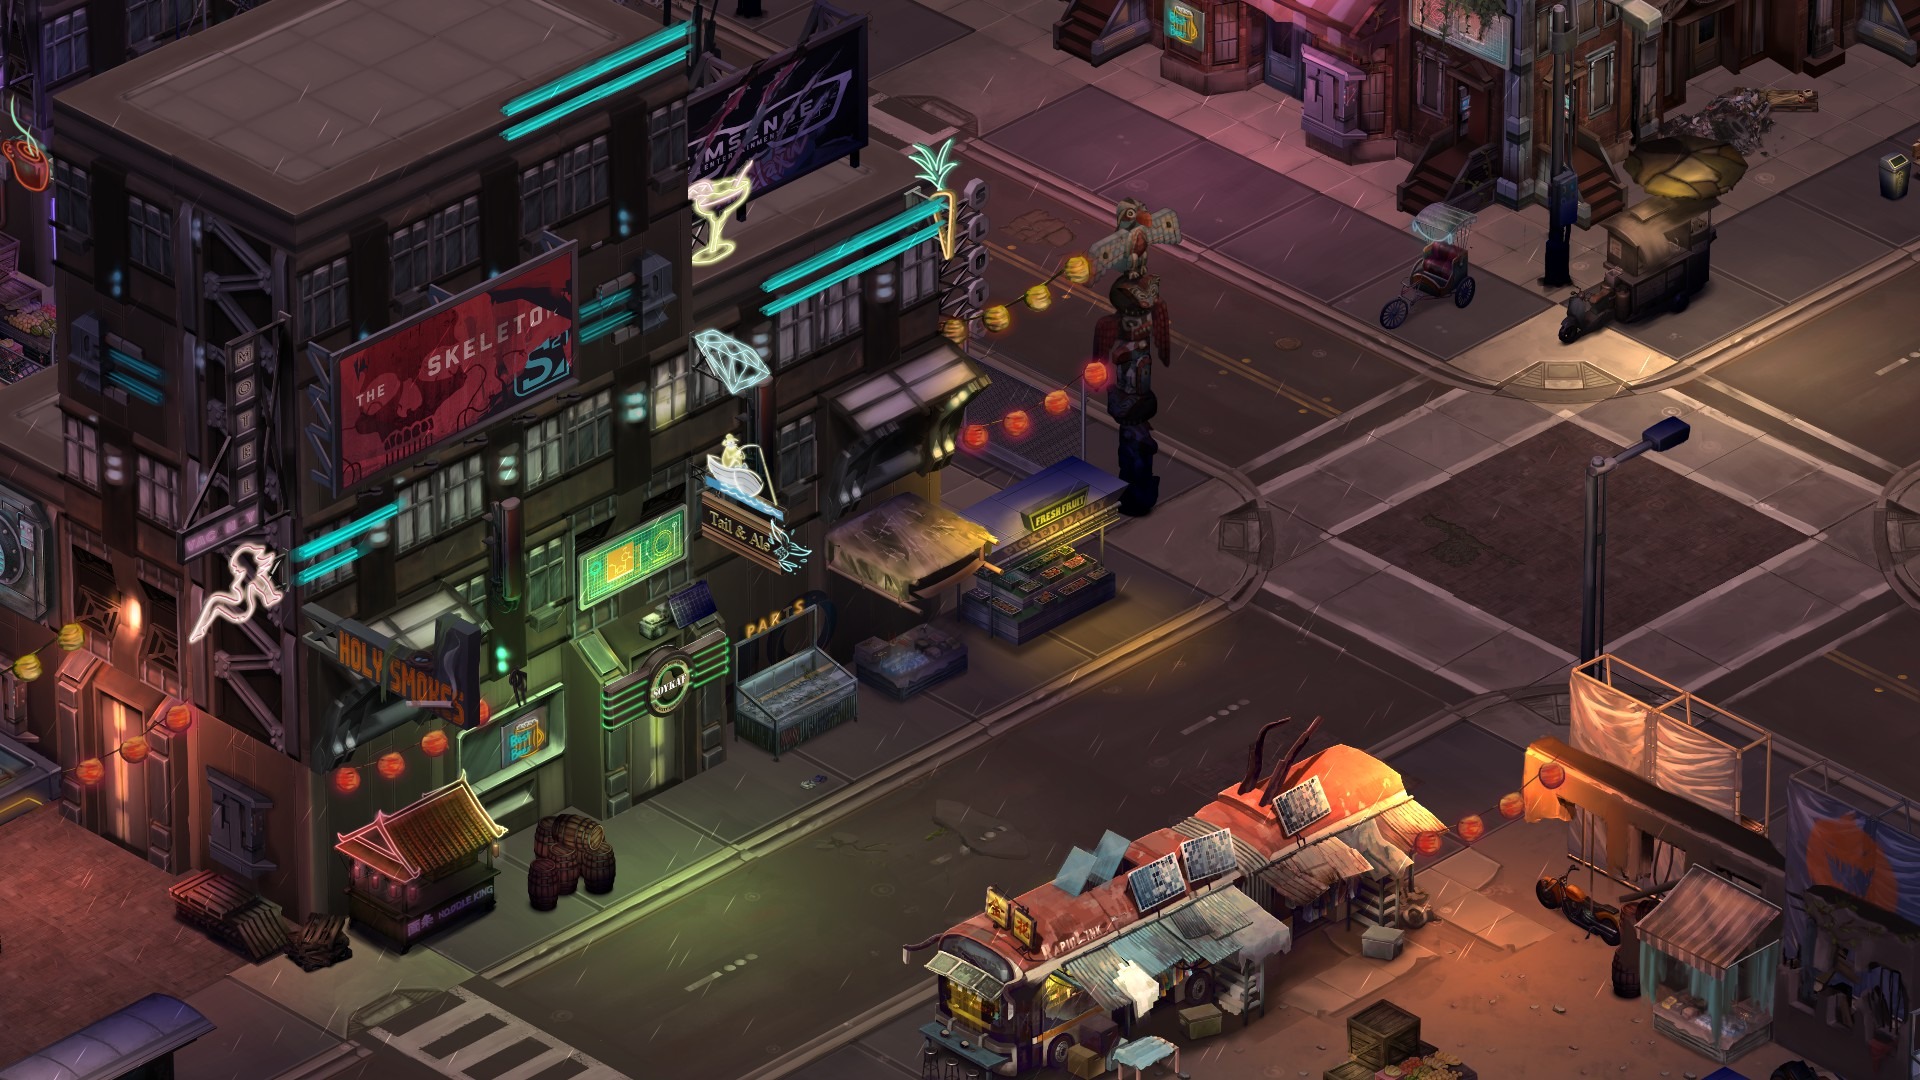 The Shadowrun Trilogy of cyberpunk RPGs is free on GOG this weekend